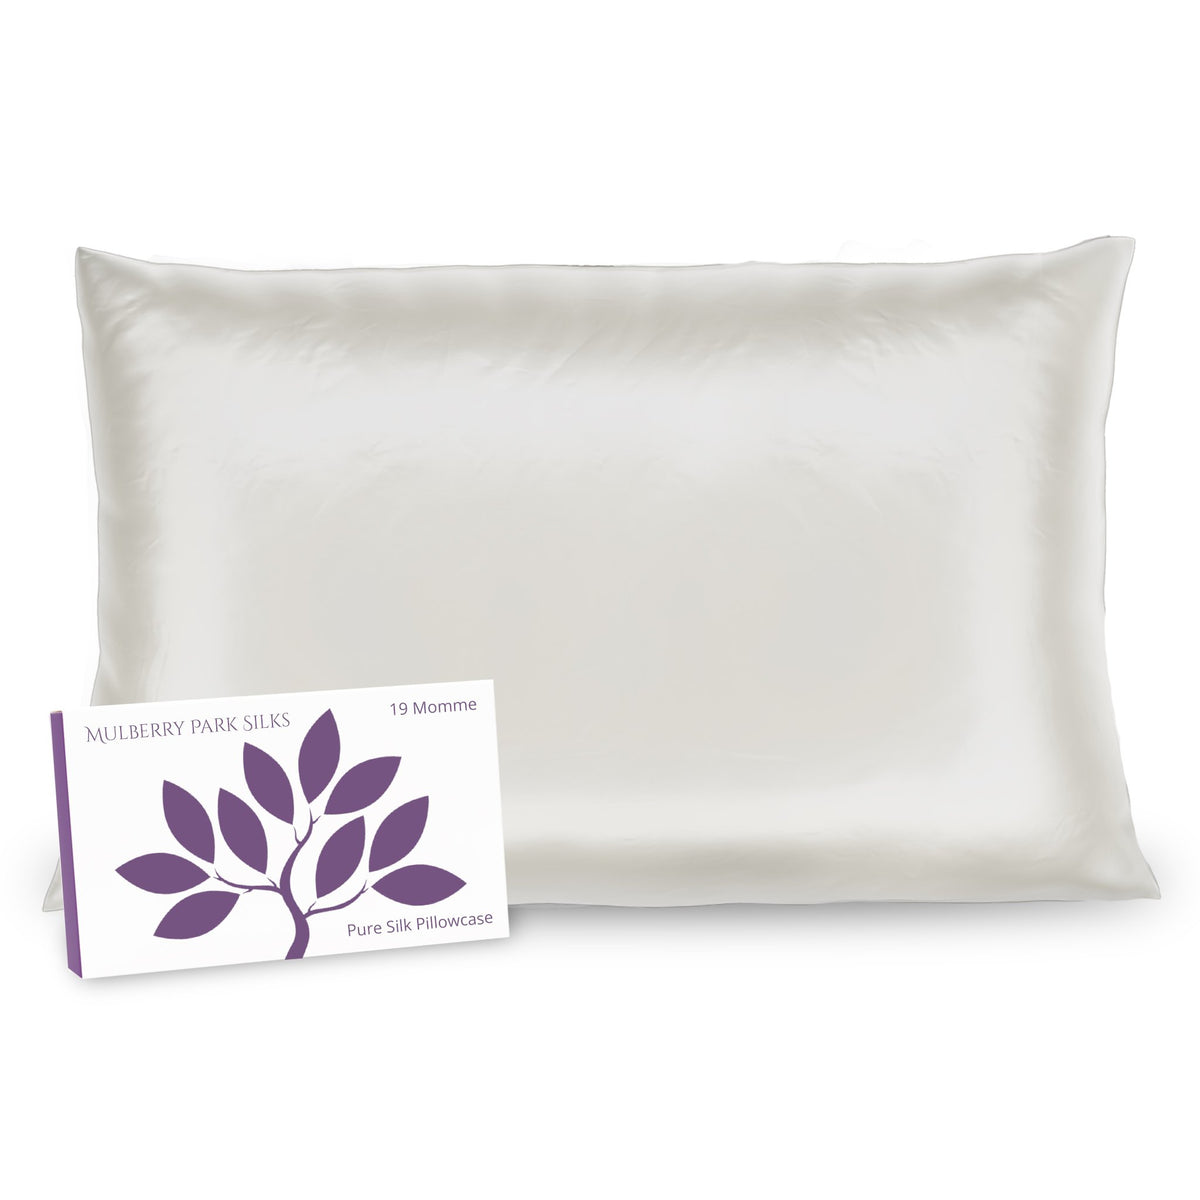 Mulberry Park Silks 19 Momme Pillowcase  Ivory with box packaging